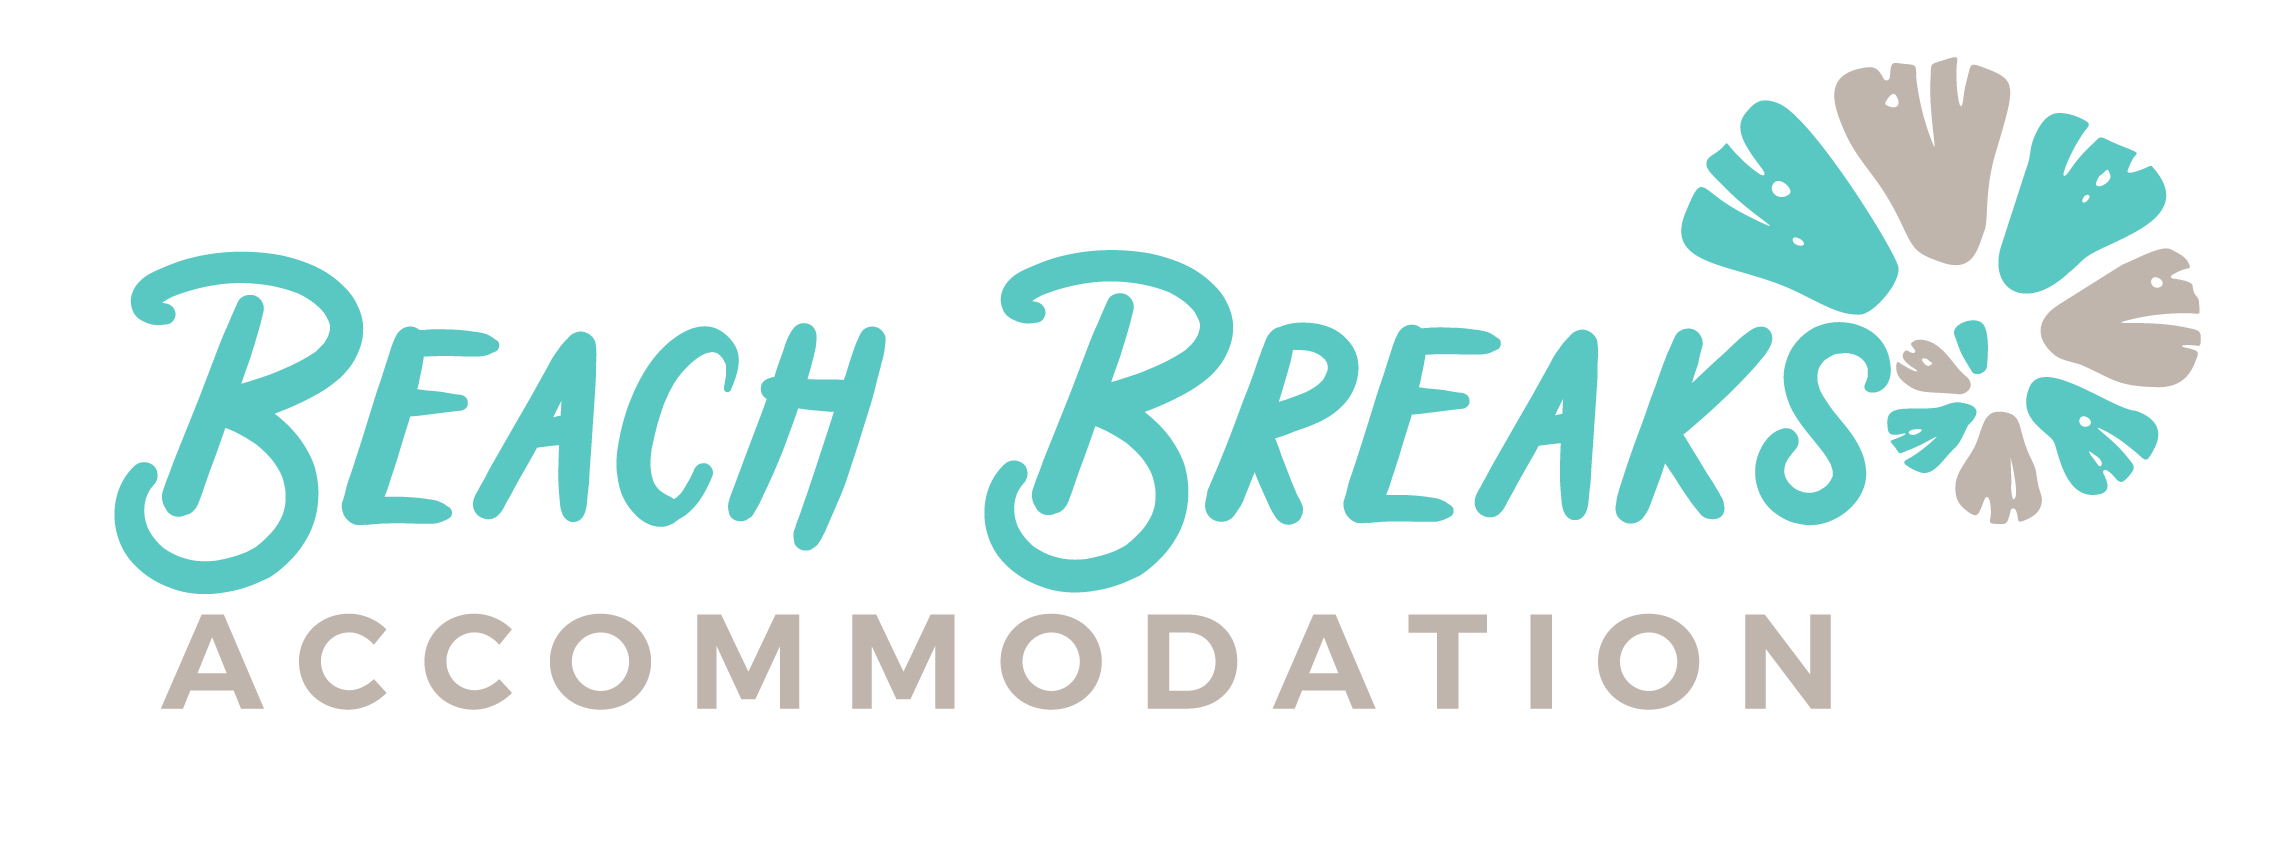 Beach Breaks Accommodation |   Additional driver